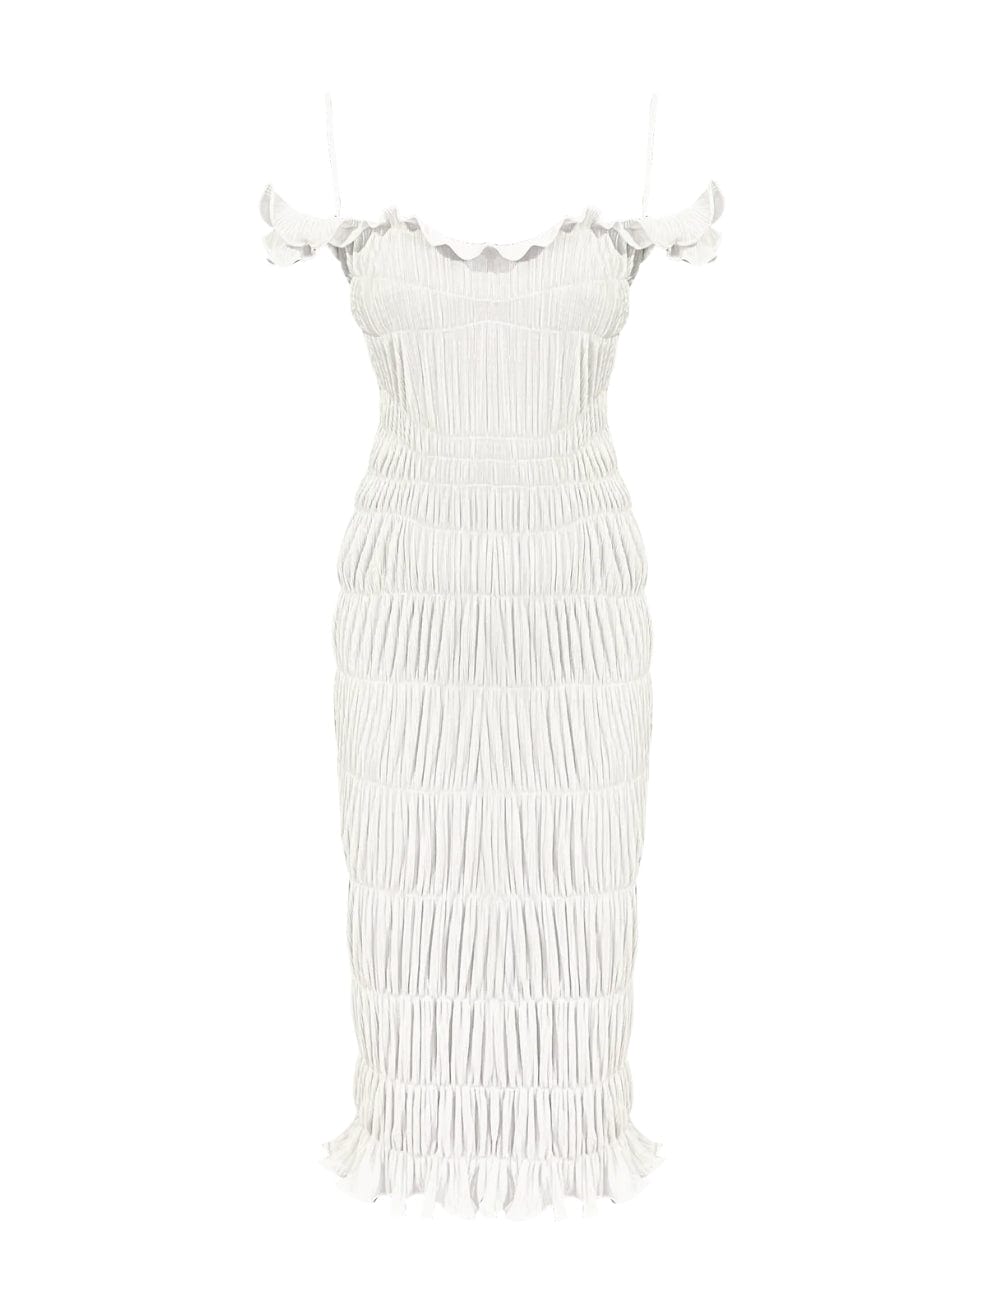 Indra Dress in White